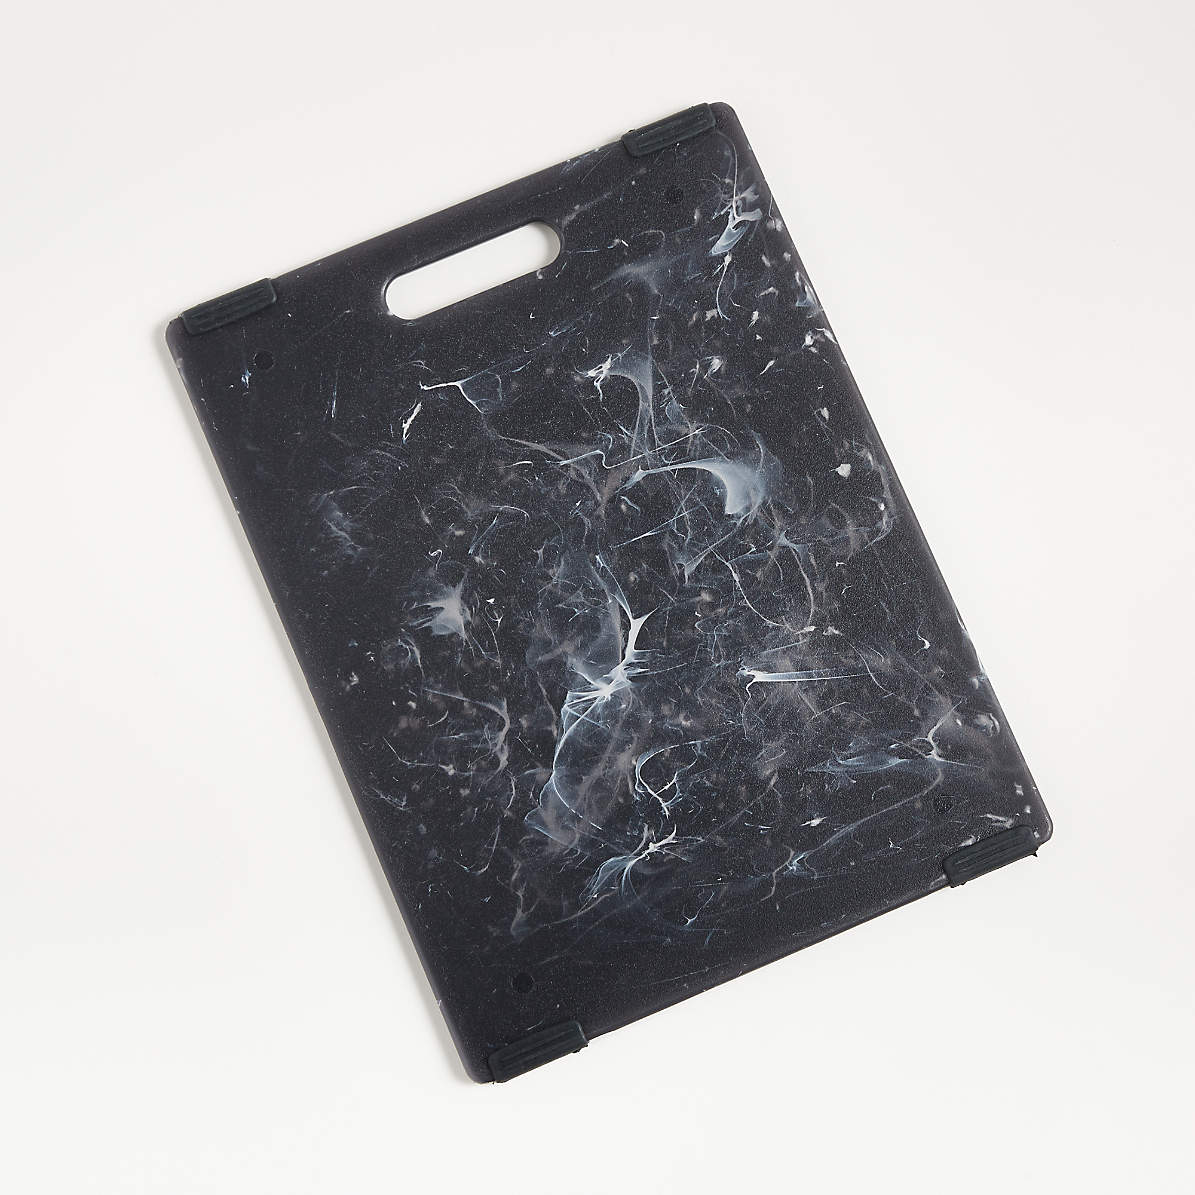 Jelli Reversible White Marble Cutting Boards